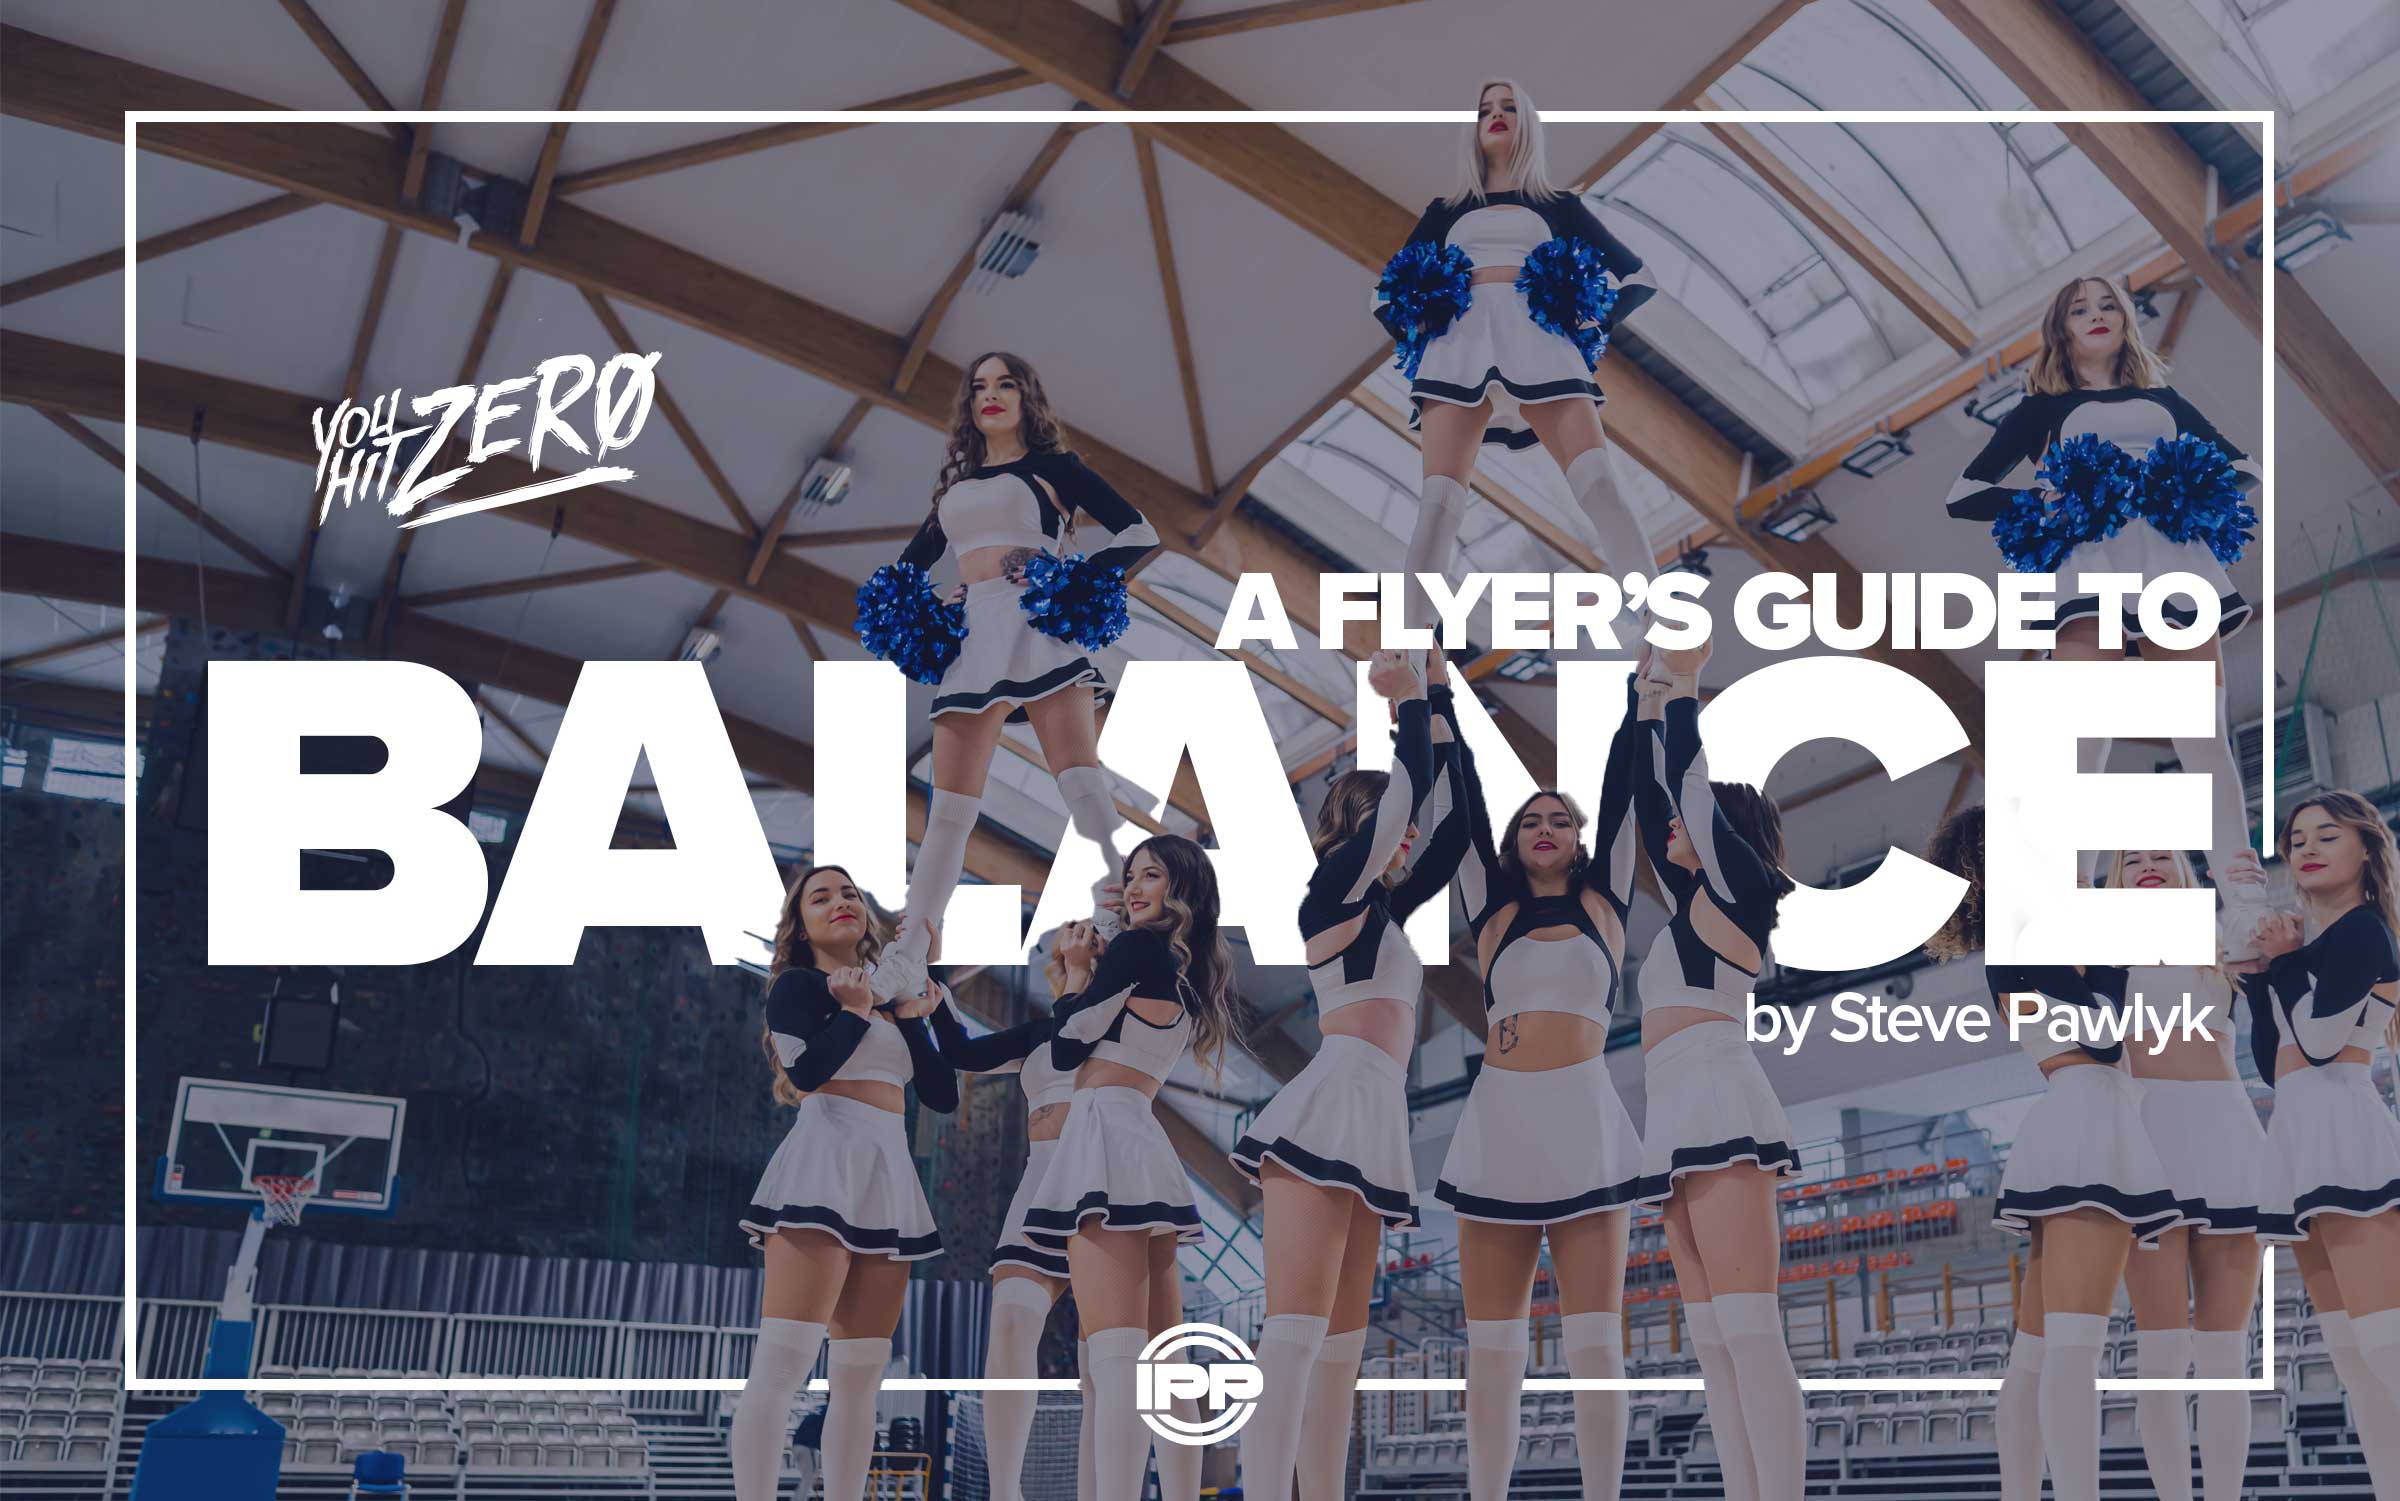 cheer flyers guide to balance